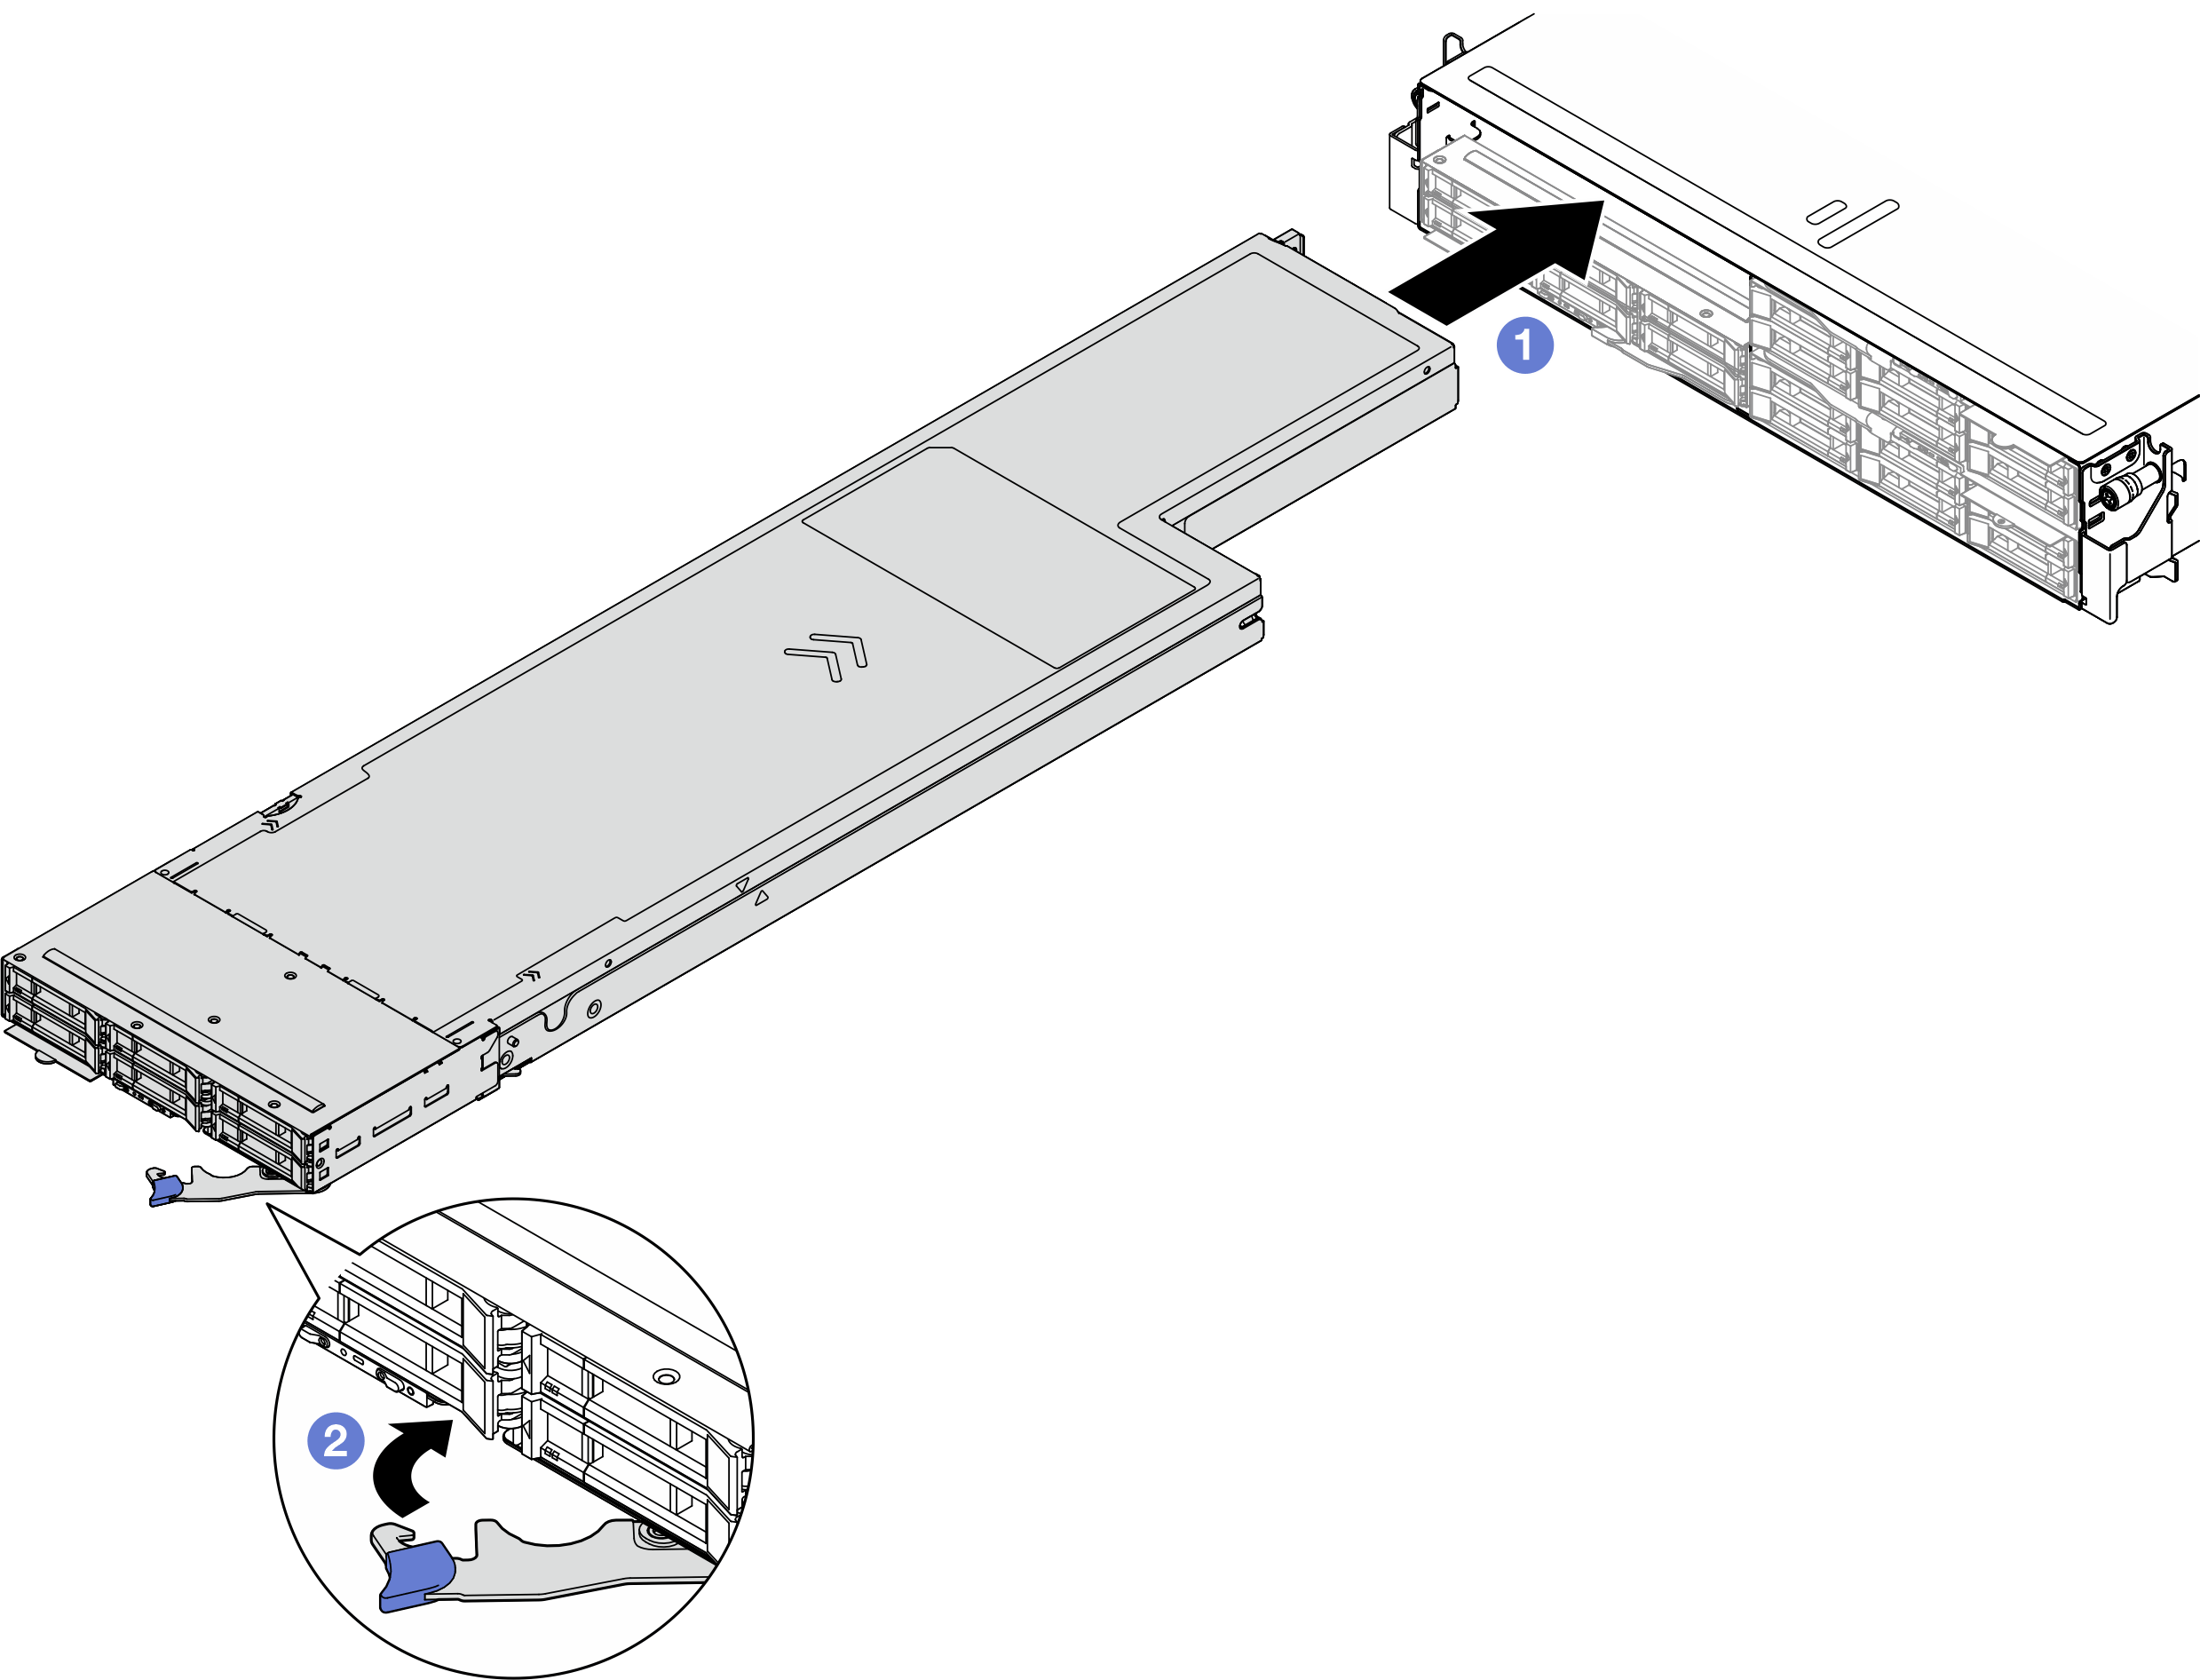 Node installation to a left tray